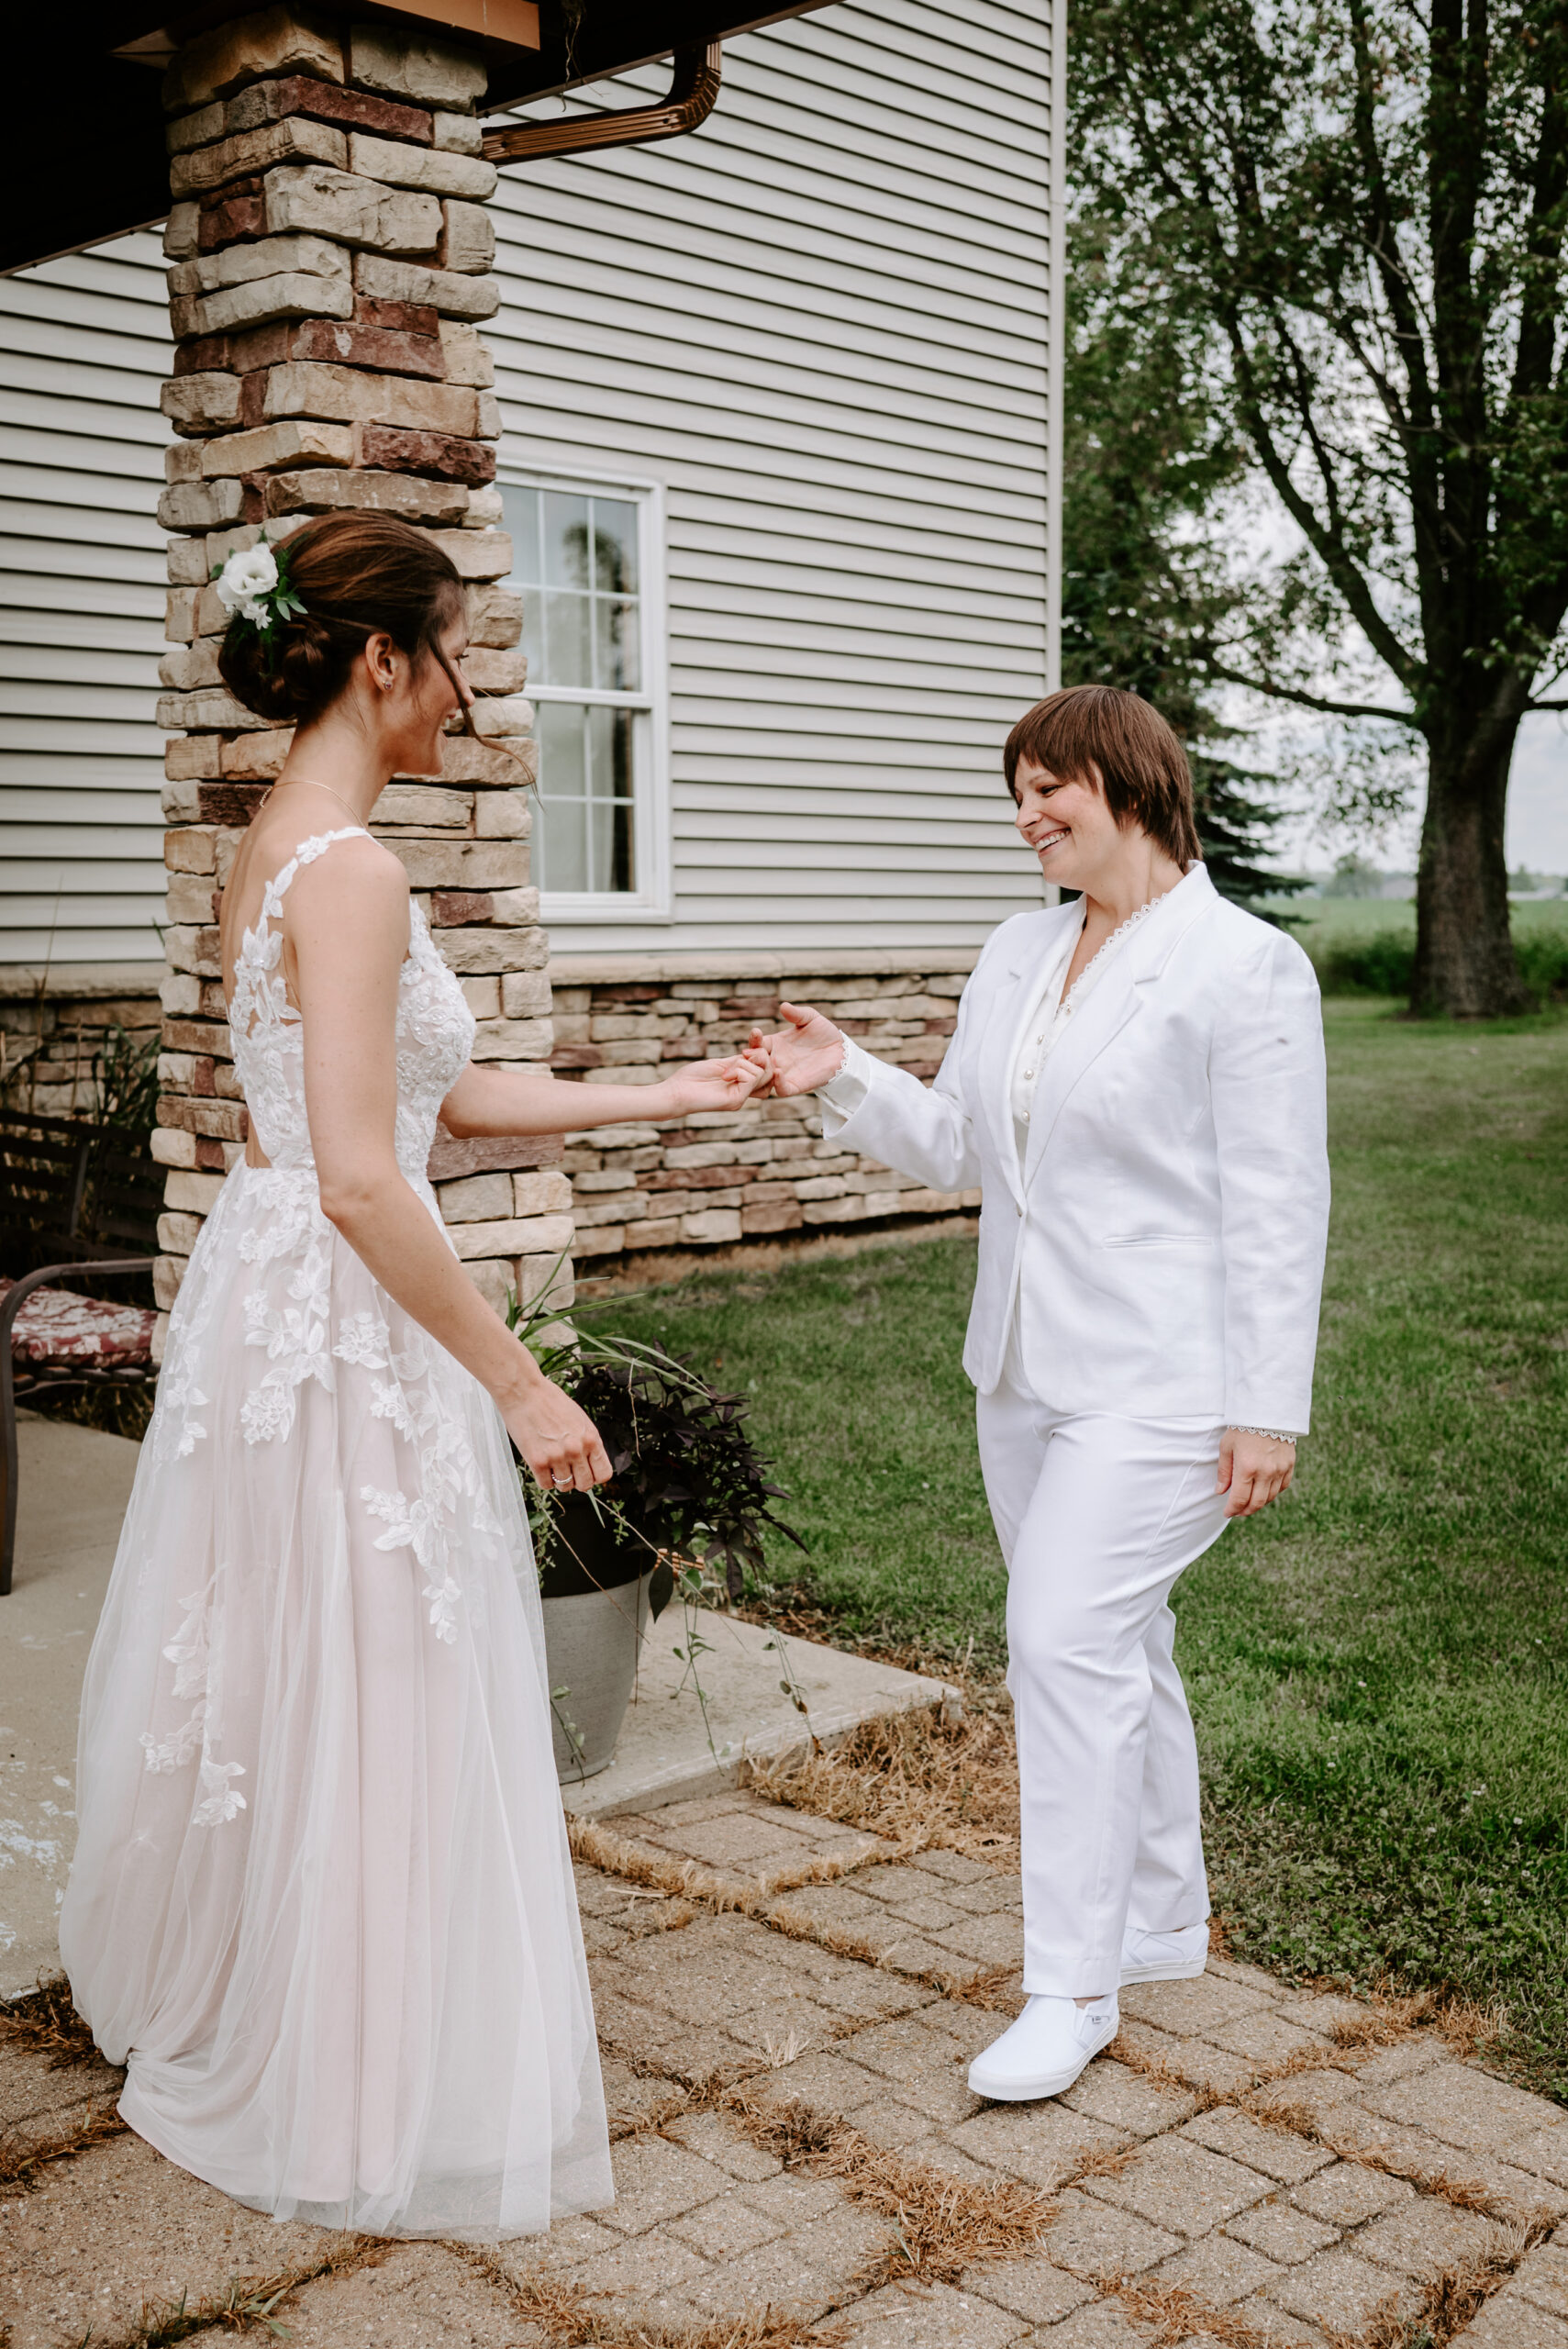 two brides during first look, emotional first look with two women, queer brides, first look photo, queer bride in suit, queer bride in dress, backyard lgbtq wedding in Lawton Michigan